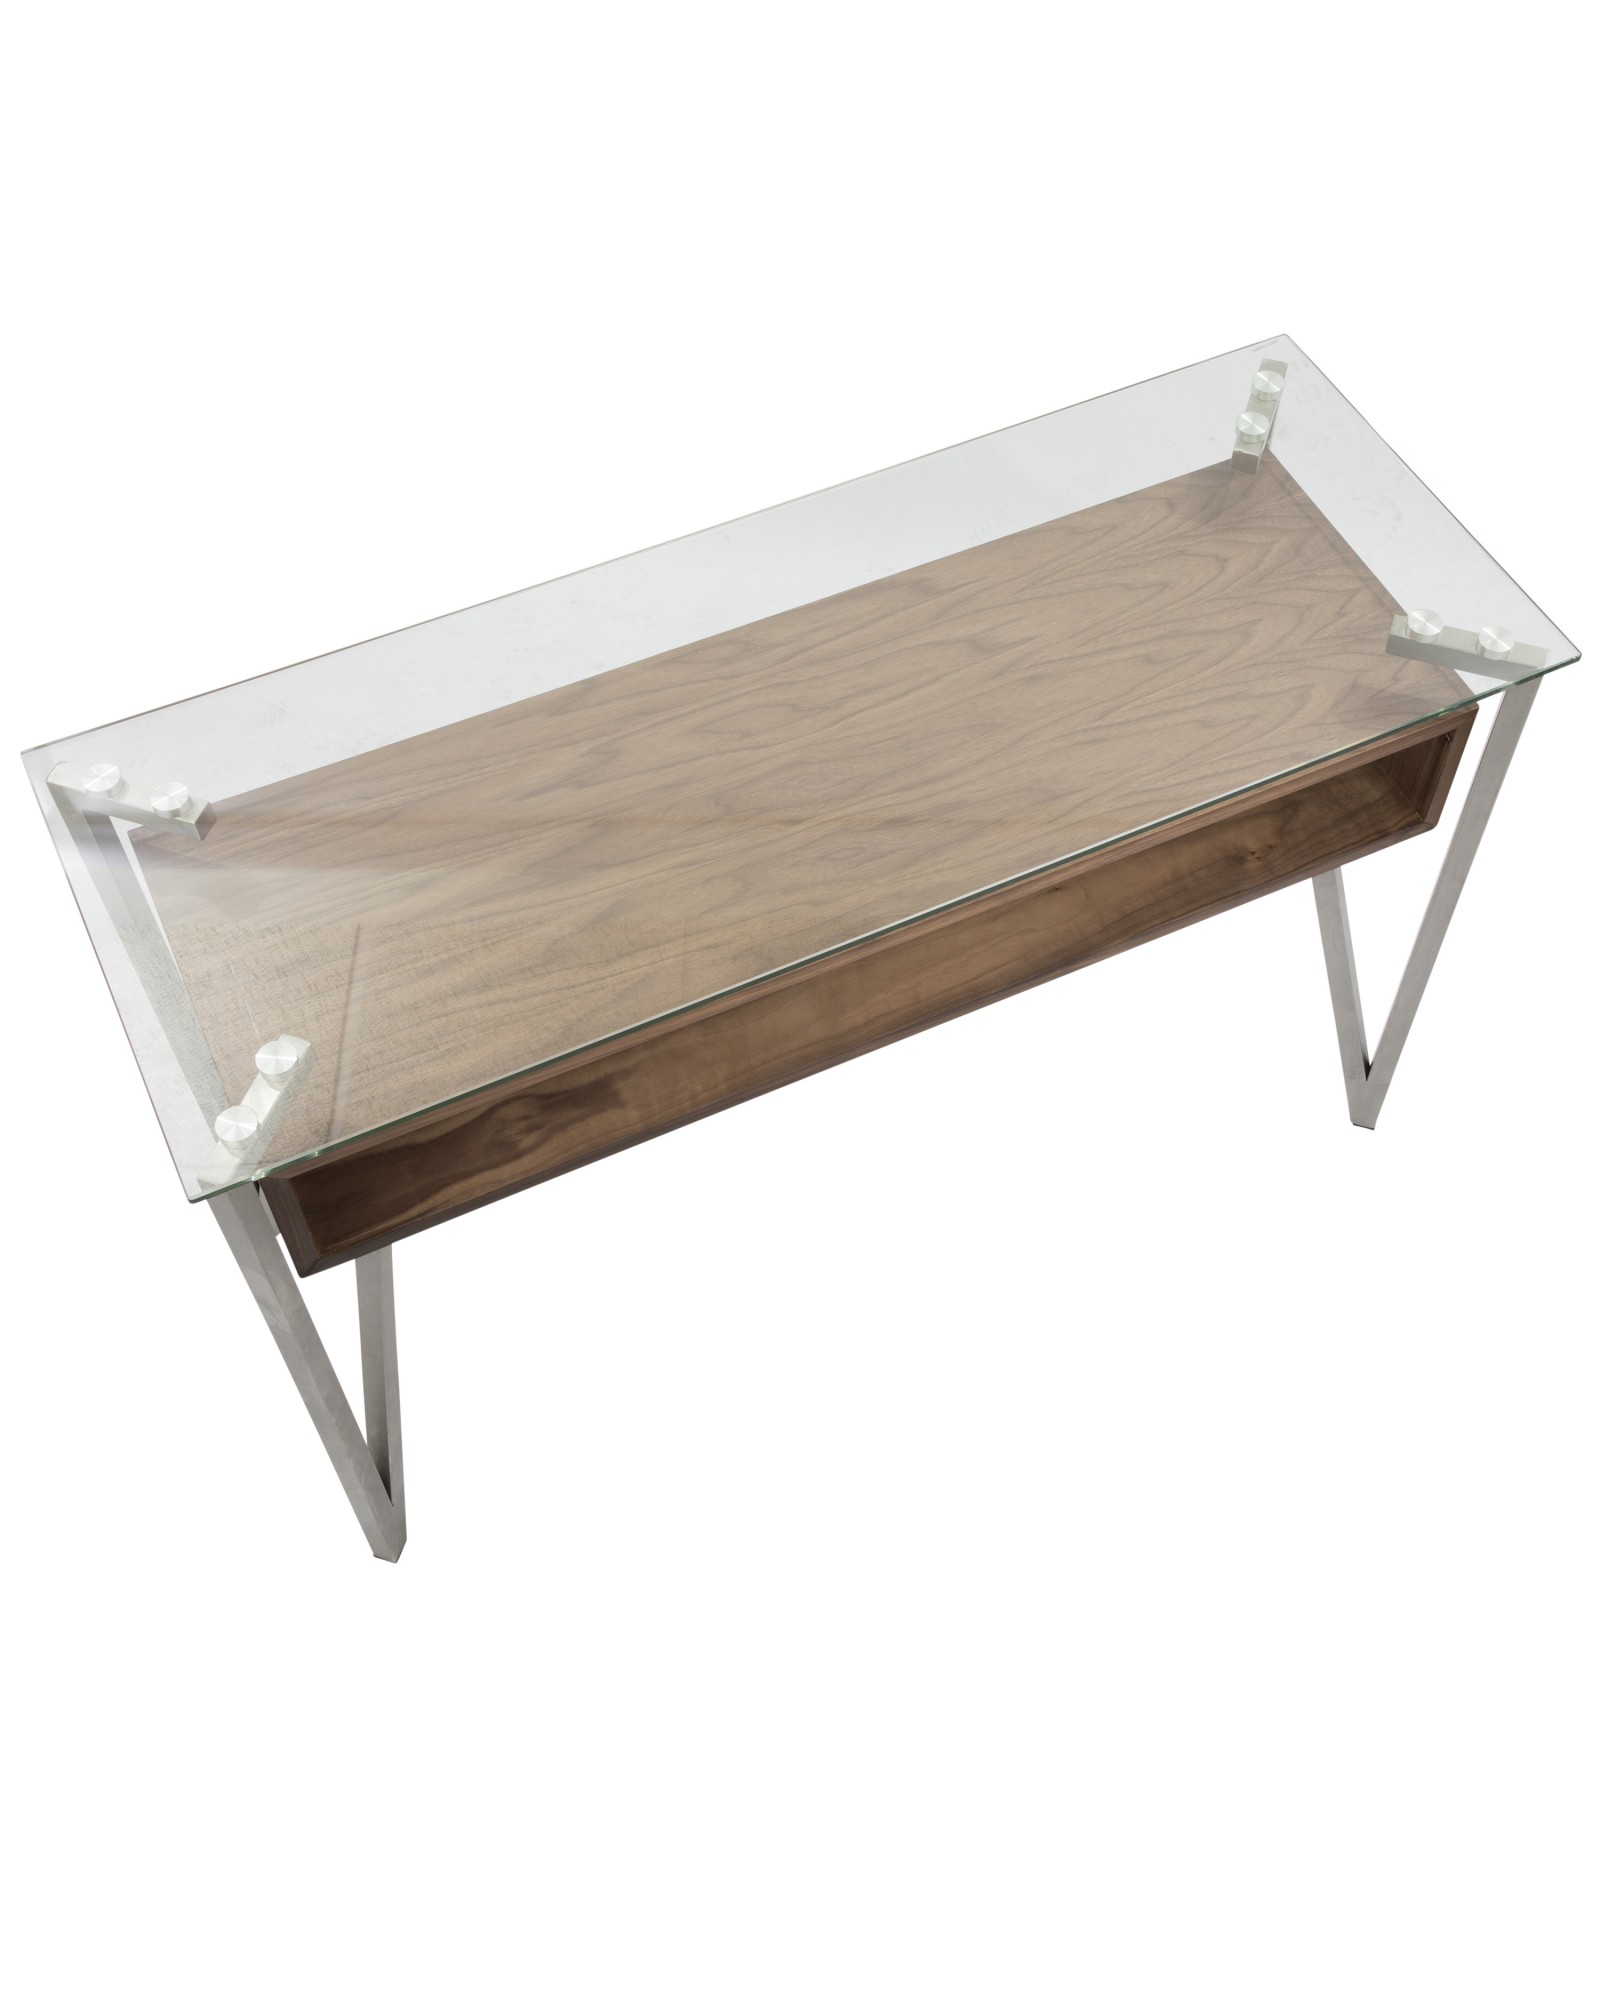 Hover Contemporary Console Table with Brushed Stainless Steel Frame, Walnut Wood Shelf, and Clear Glass Top